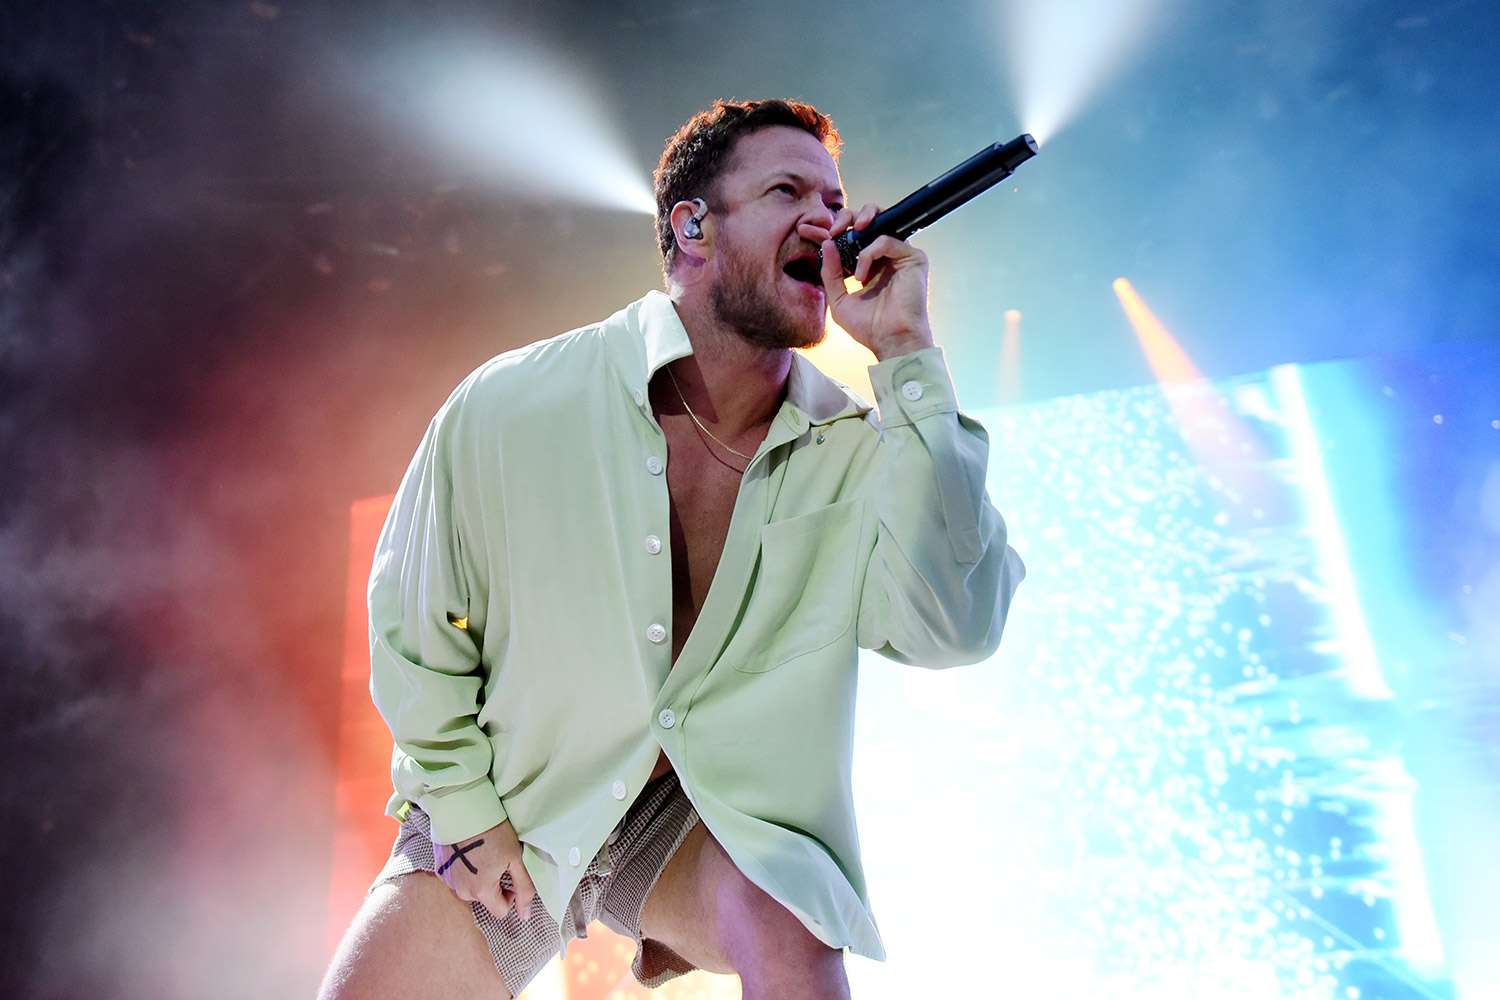 Imagine Dragons' Dan Reynolds Says Band Has 'Been Late on Stage Because We're Playing “League of Legends”'